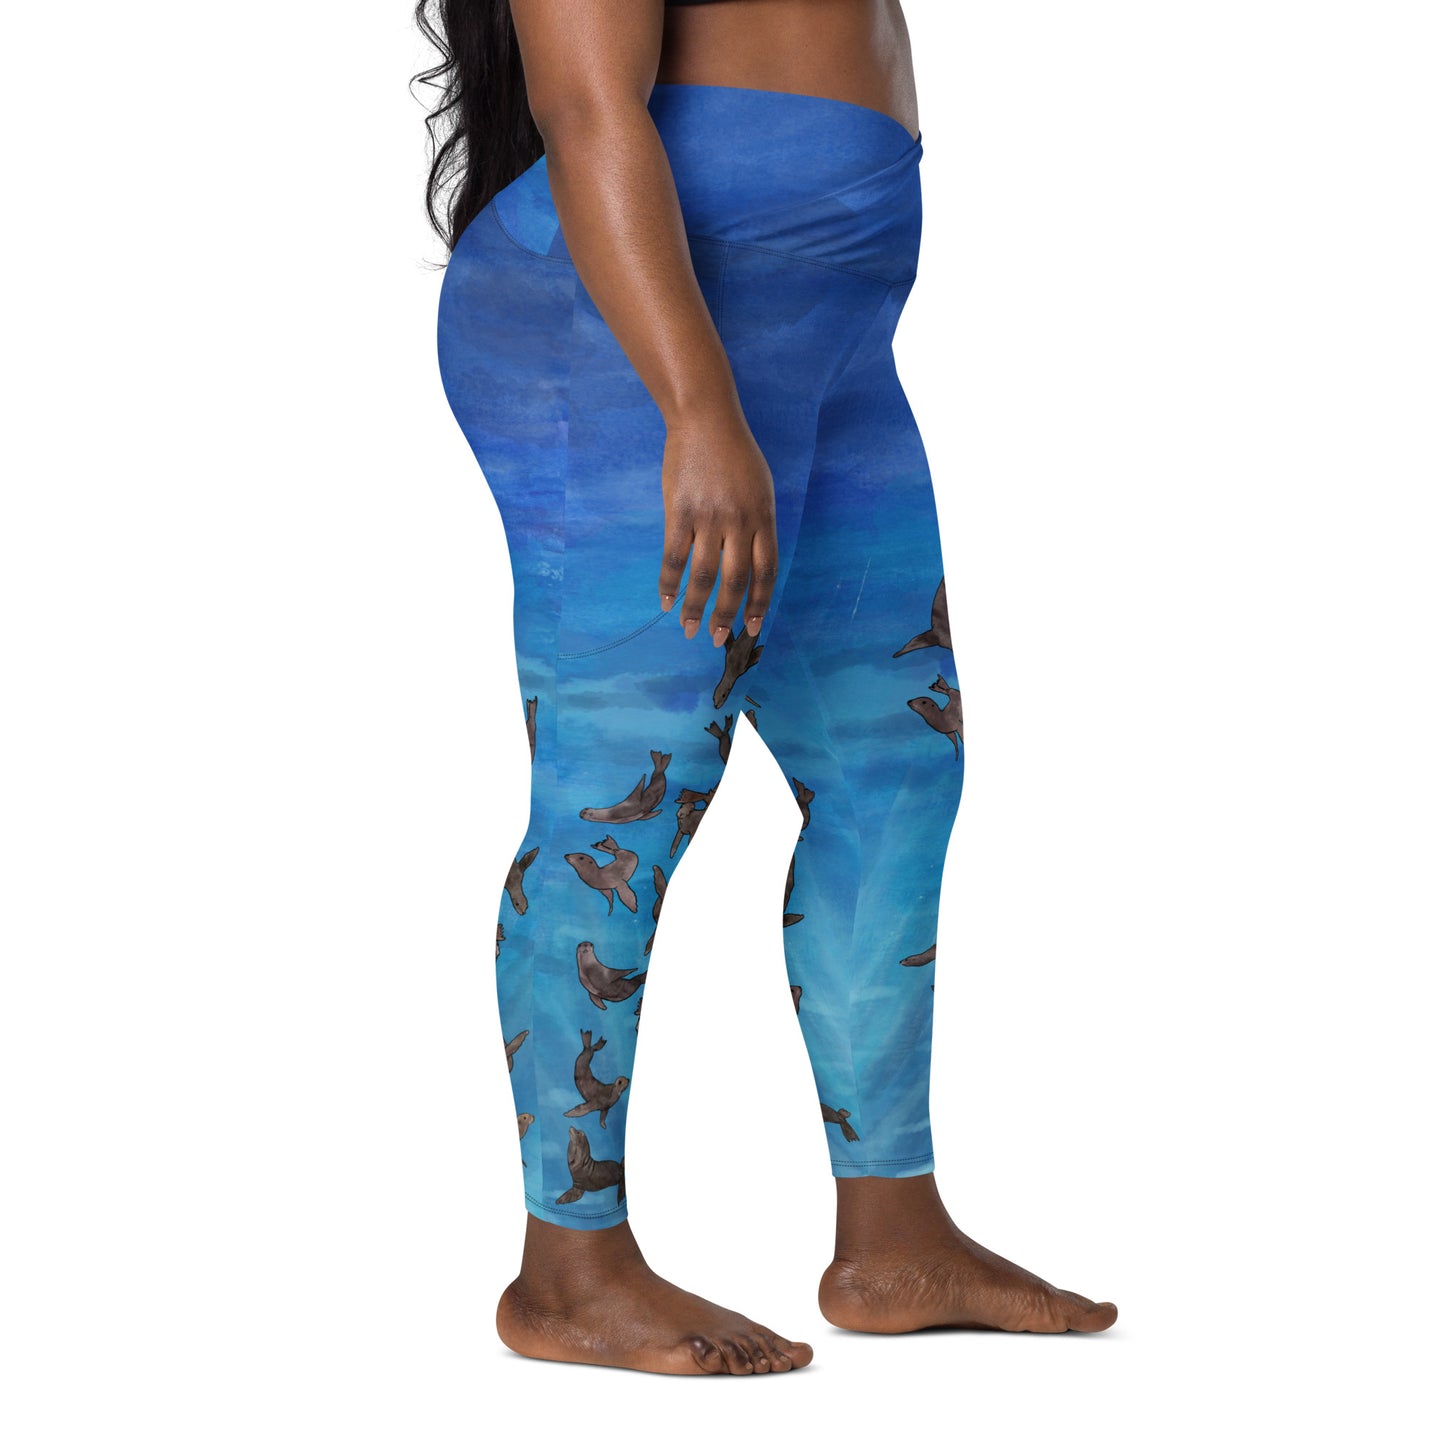 Sea Lion Crossover leggings with pockets